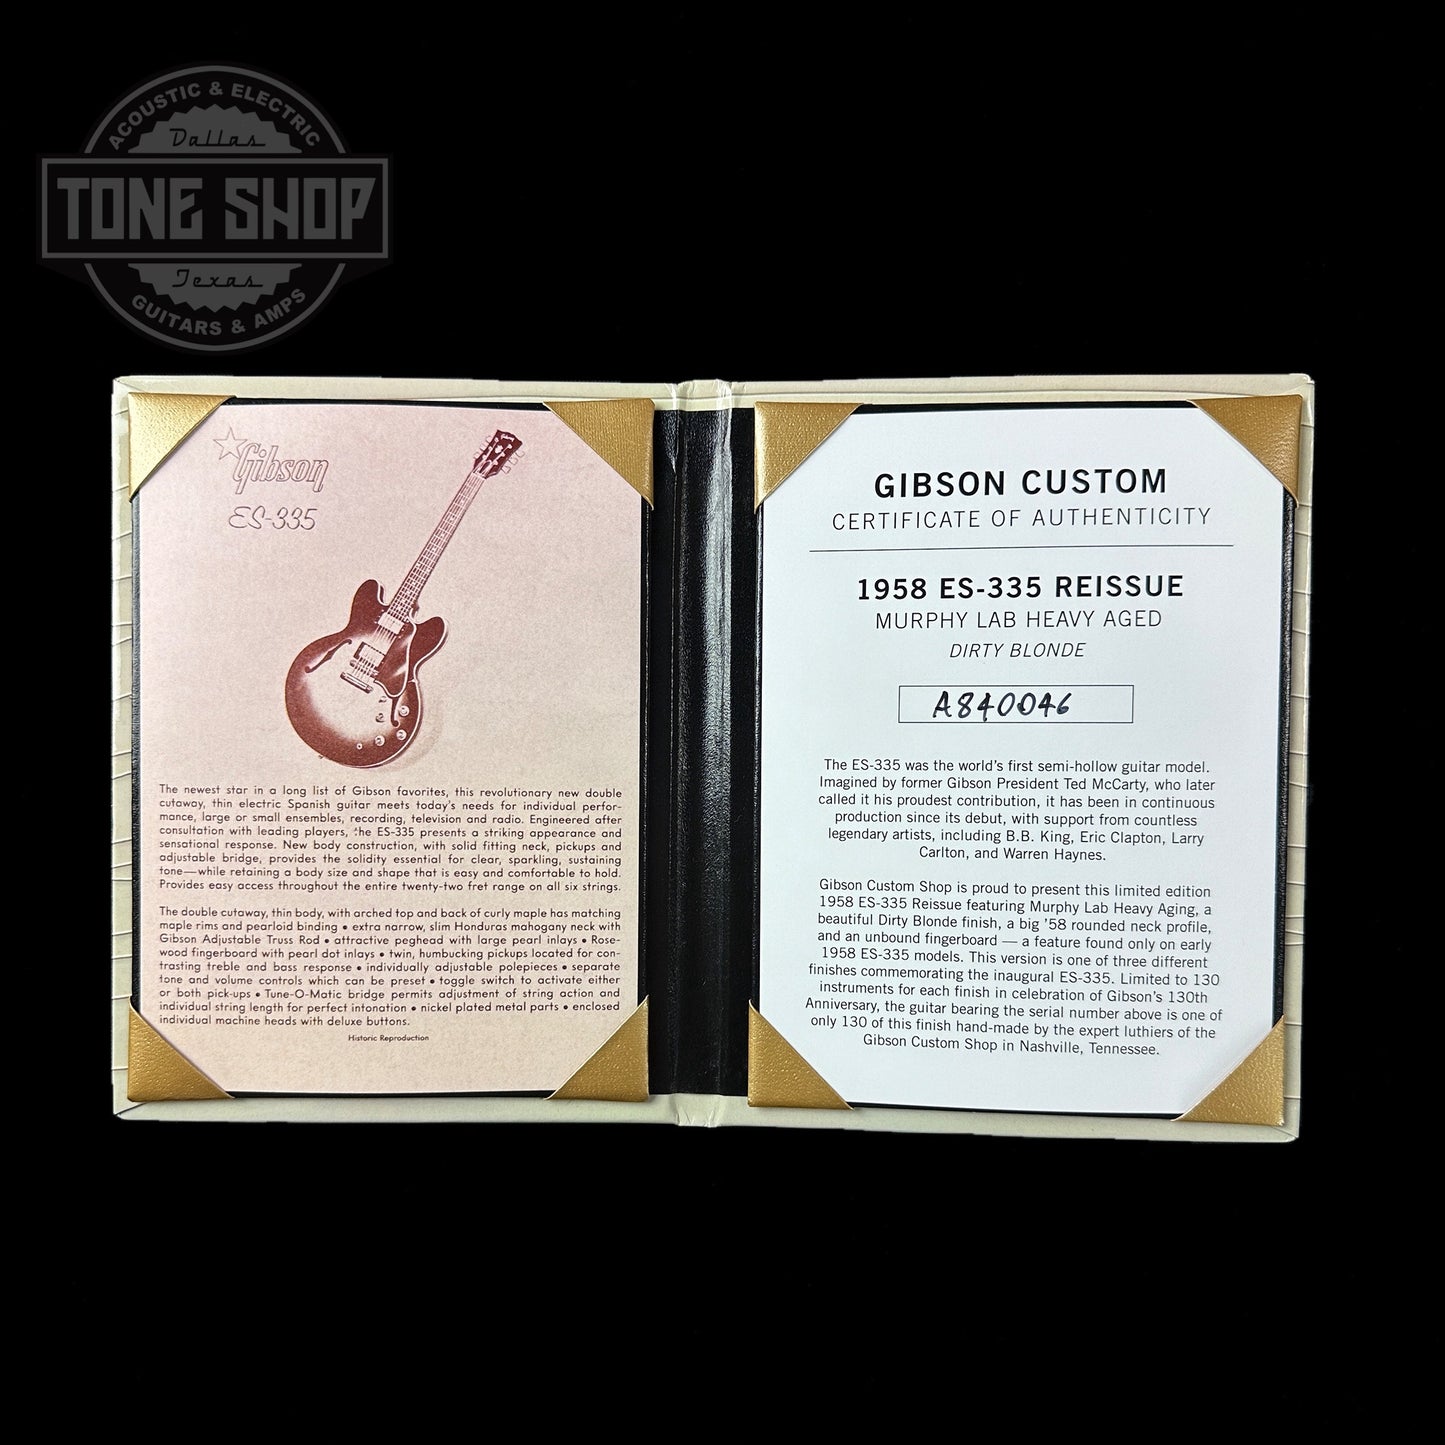 Certificate of authenticity for Gibson Custom Shop 1958 ES-335 Dirty Blonde Murphy Lab Heavy Aged Limited.